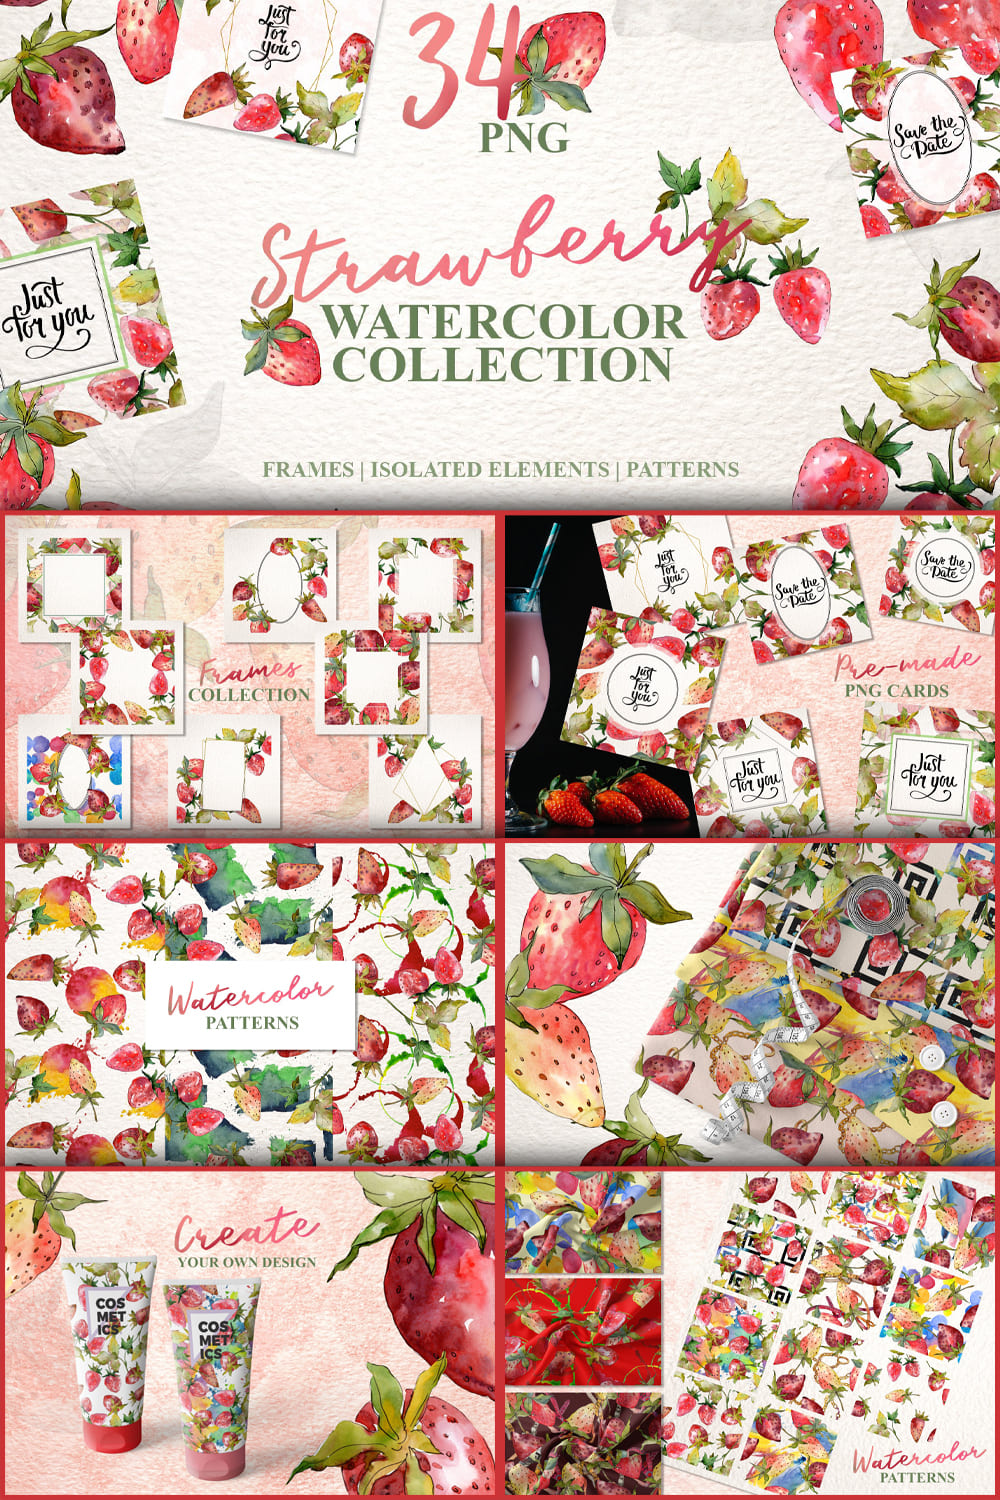 230932 strawberry collection watercolor png pinterest 1000 1500 508